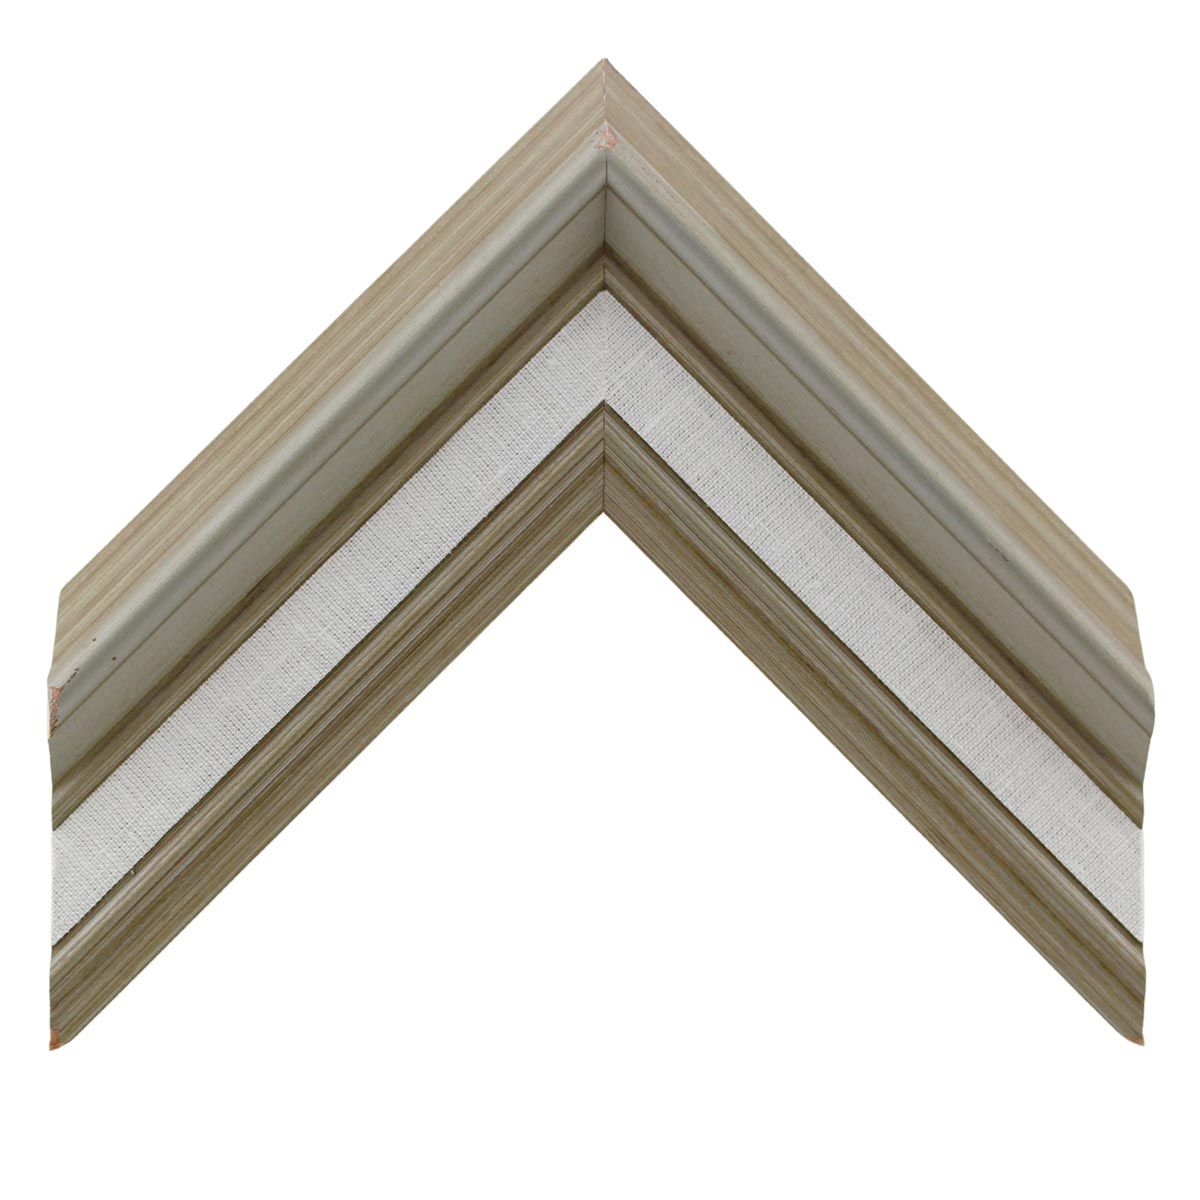 Domestic Frame M139-2-SIL-1,2, 12 x 16 inches